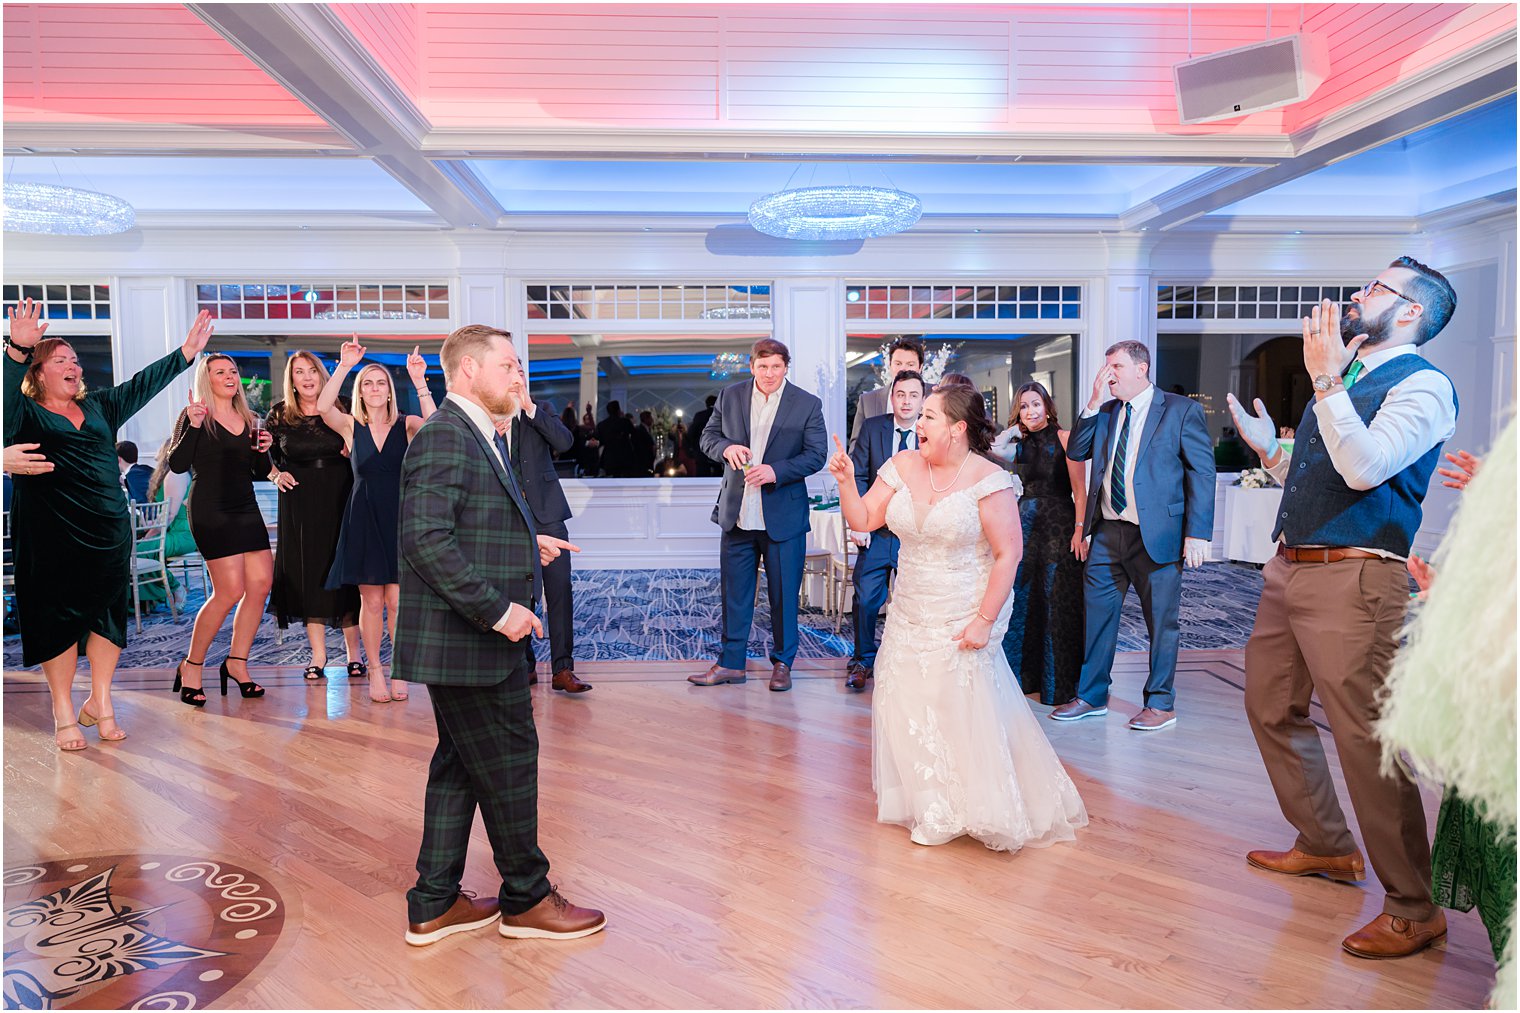 newlyweds dance during wedding reception in New Jersey